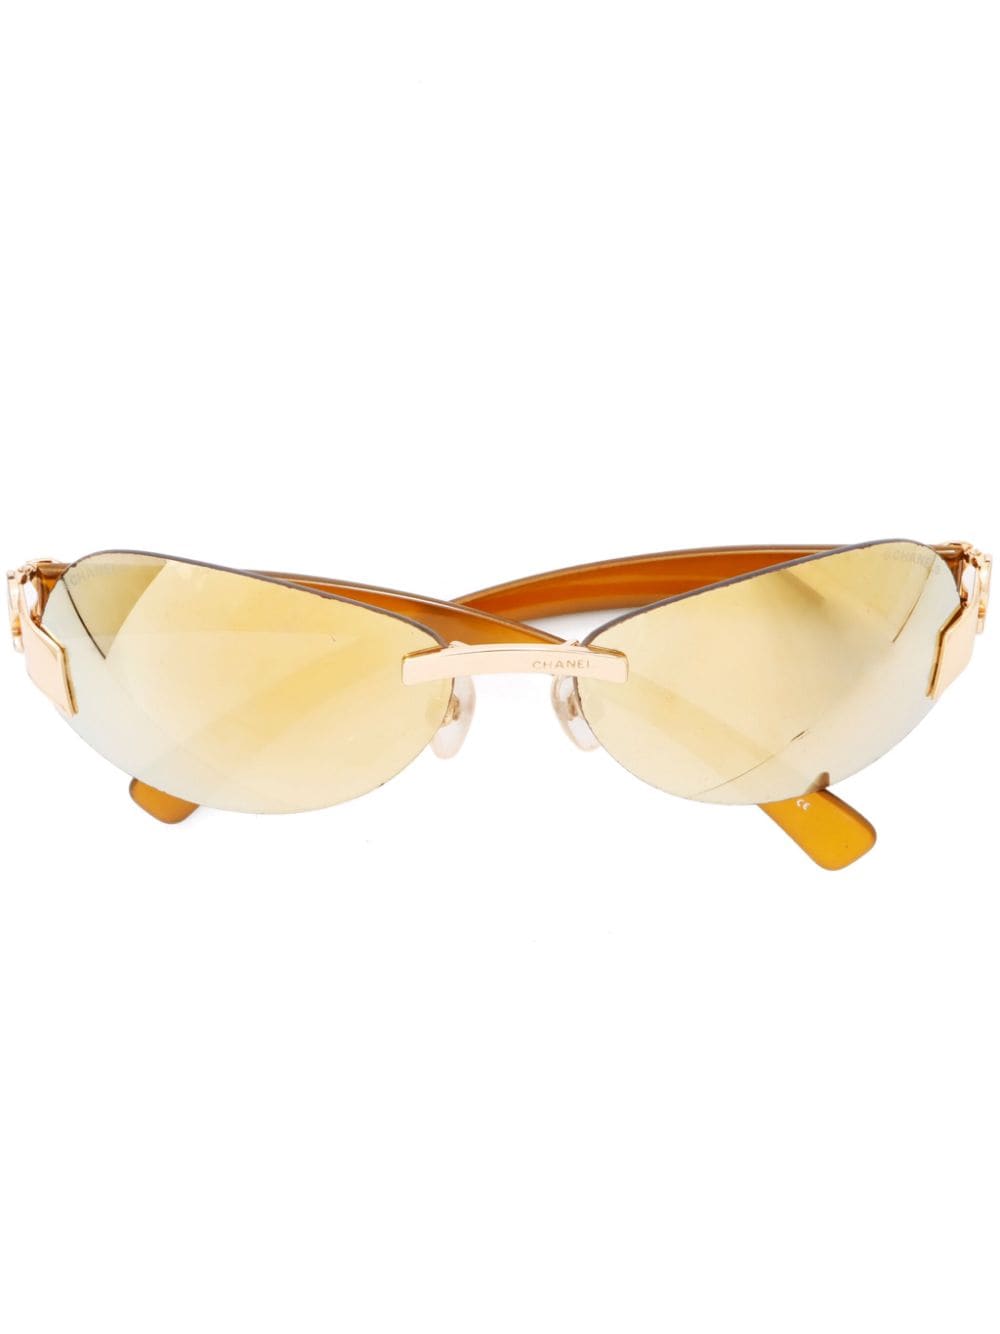 CHANEL Pre-Owned 2000 CC oval-frame sunglasses - Yellow von CHANEL Pre-Owned